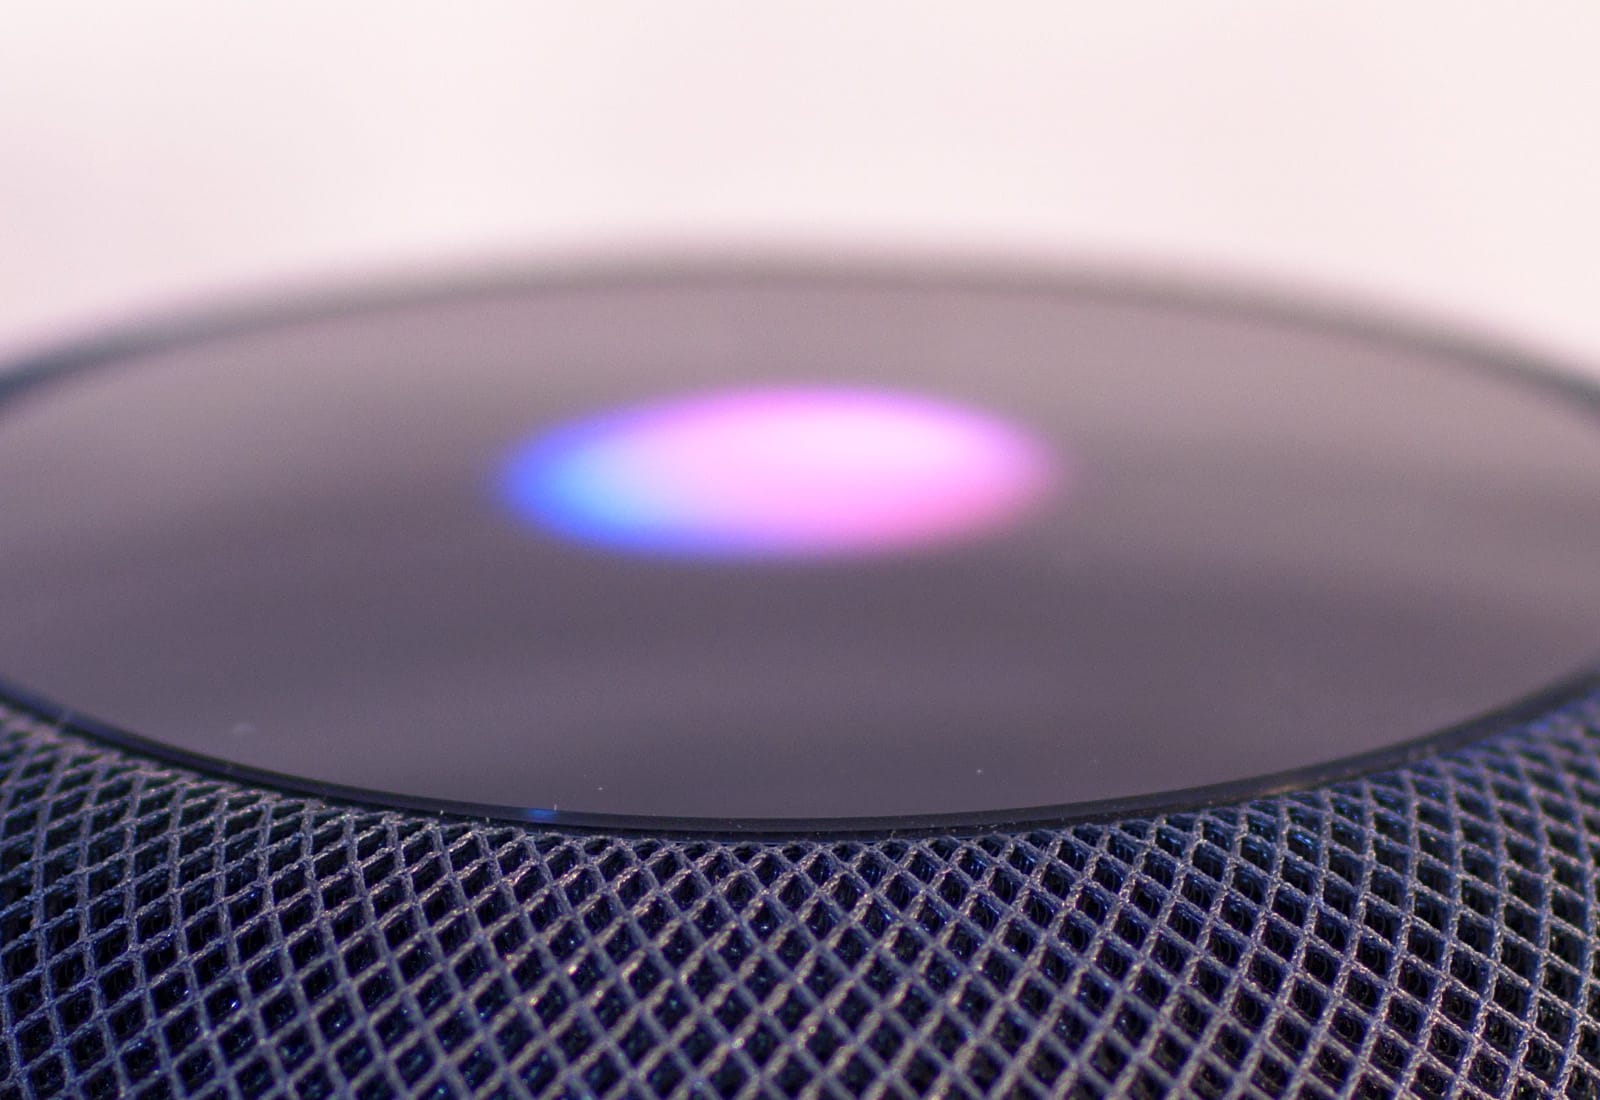 Ask Siri to play HomePod ambient sounds